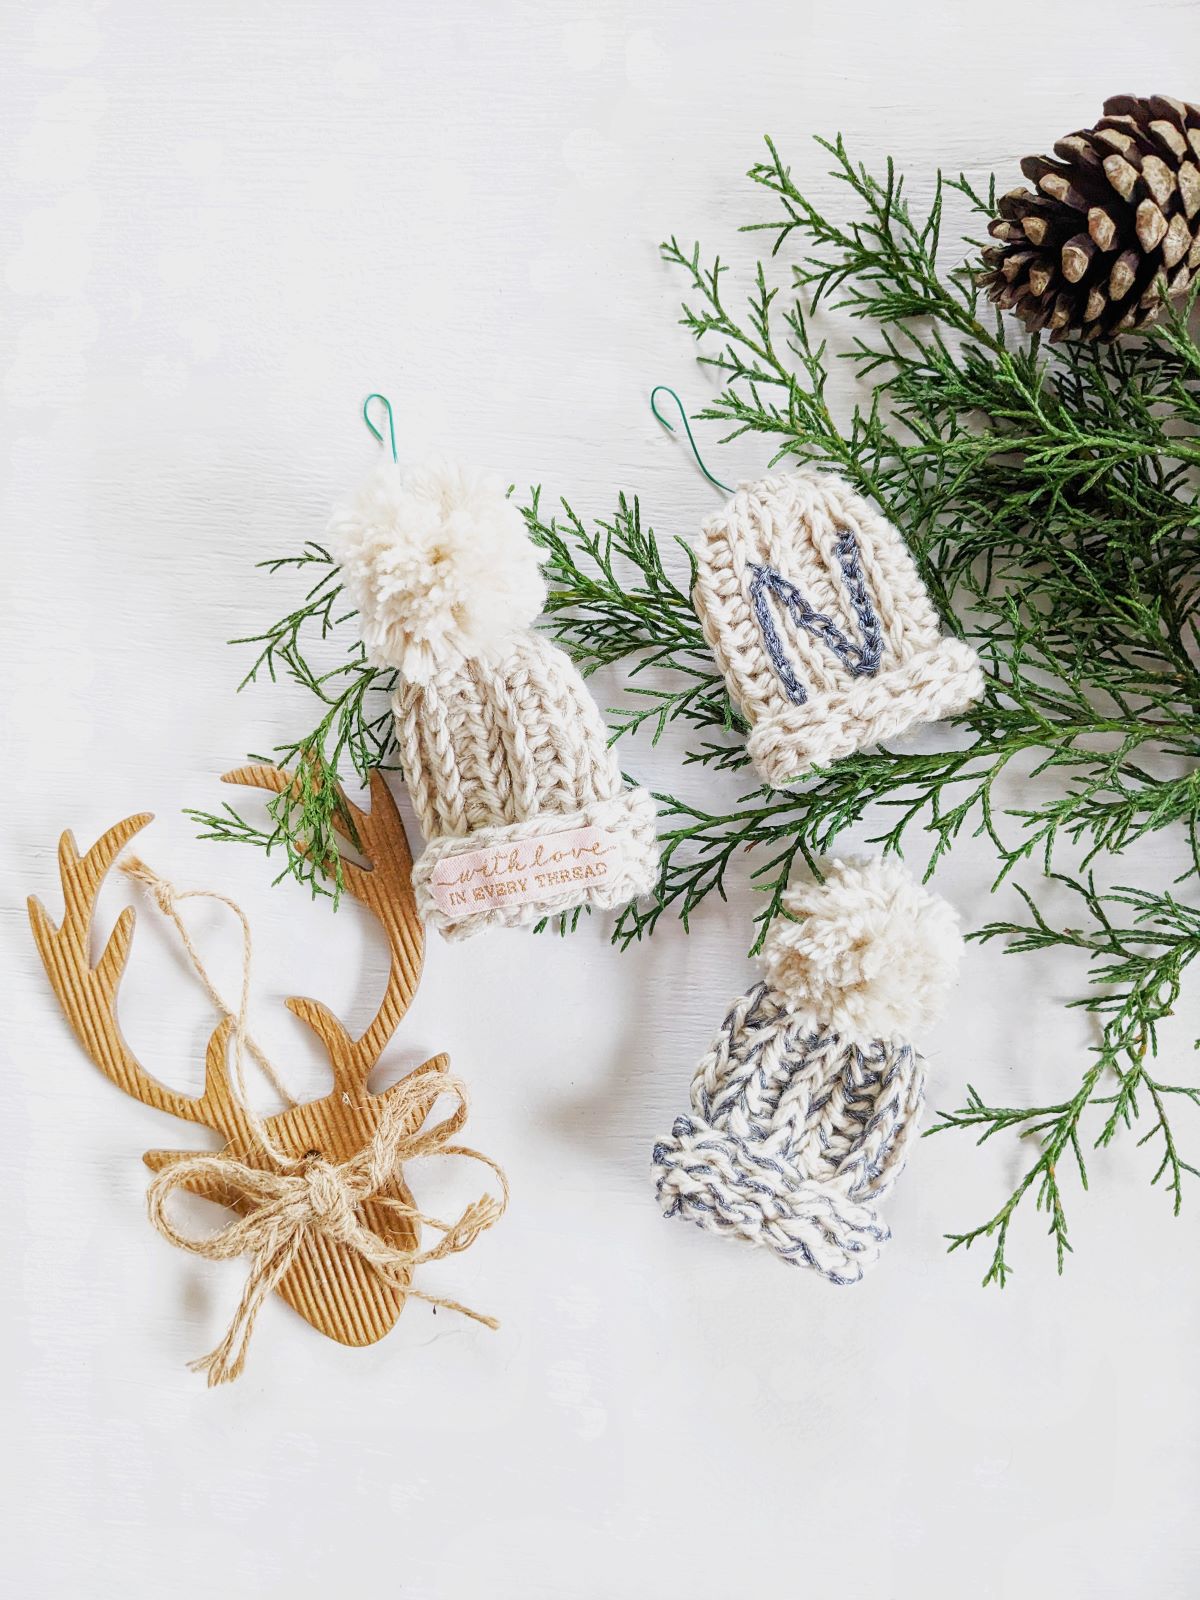 A mini crochet beanie ornament made with two colors.